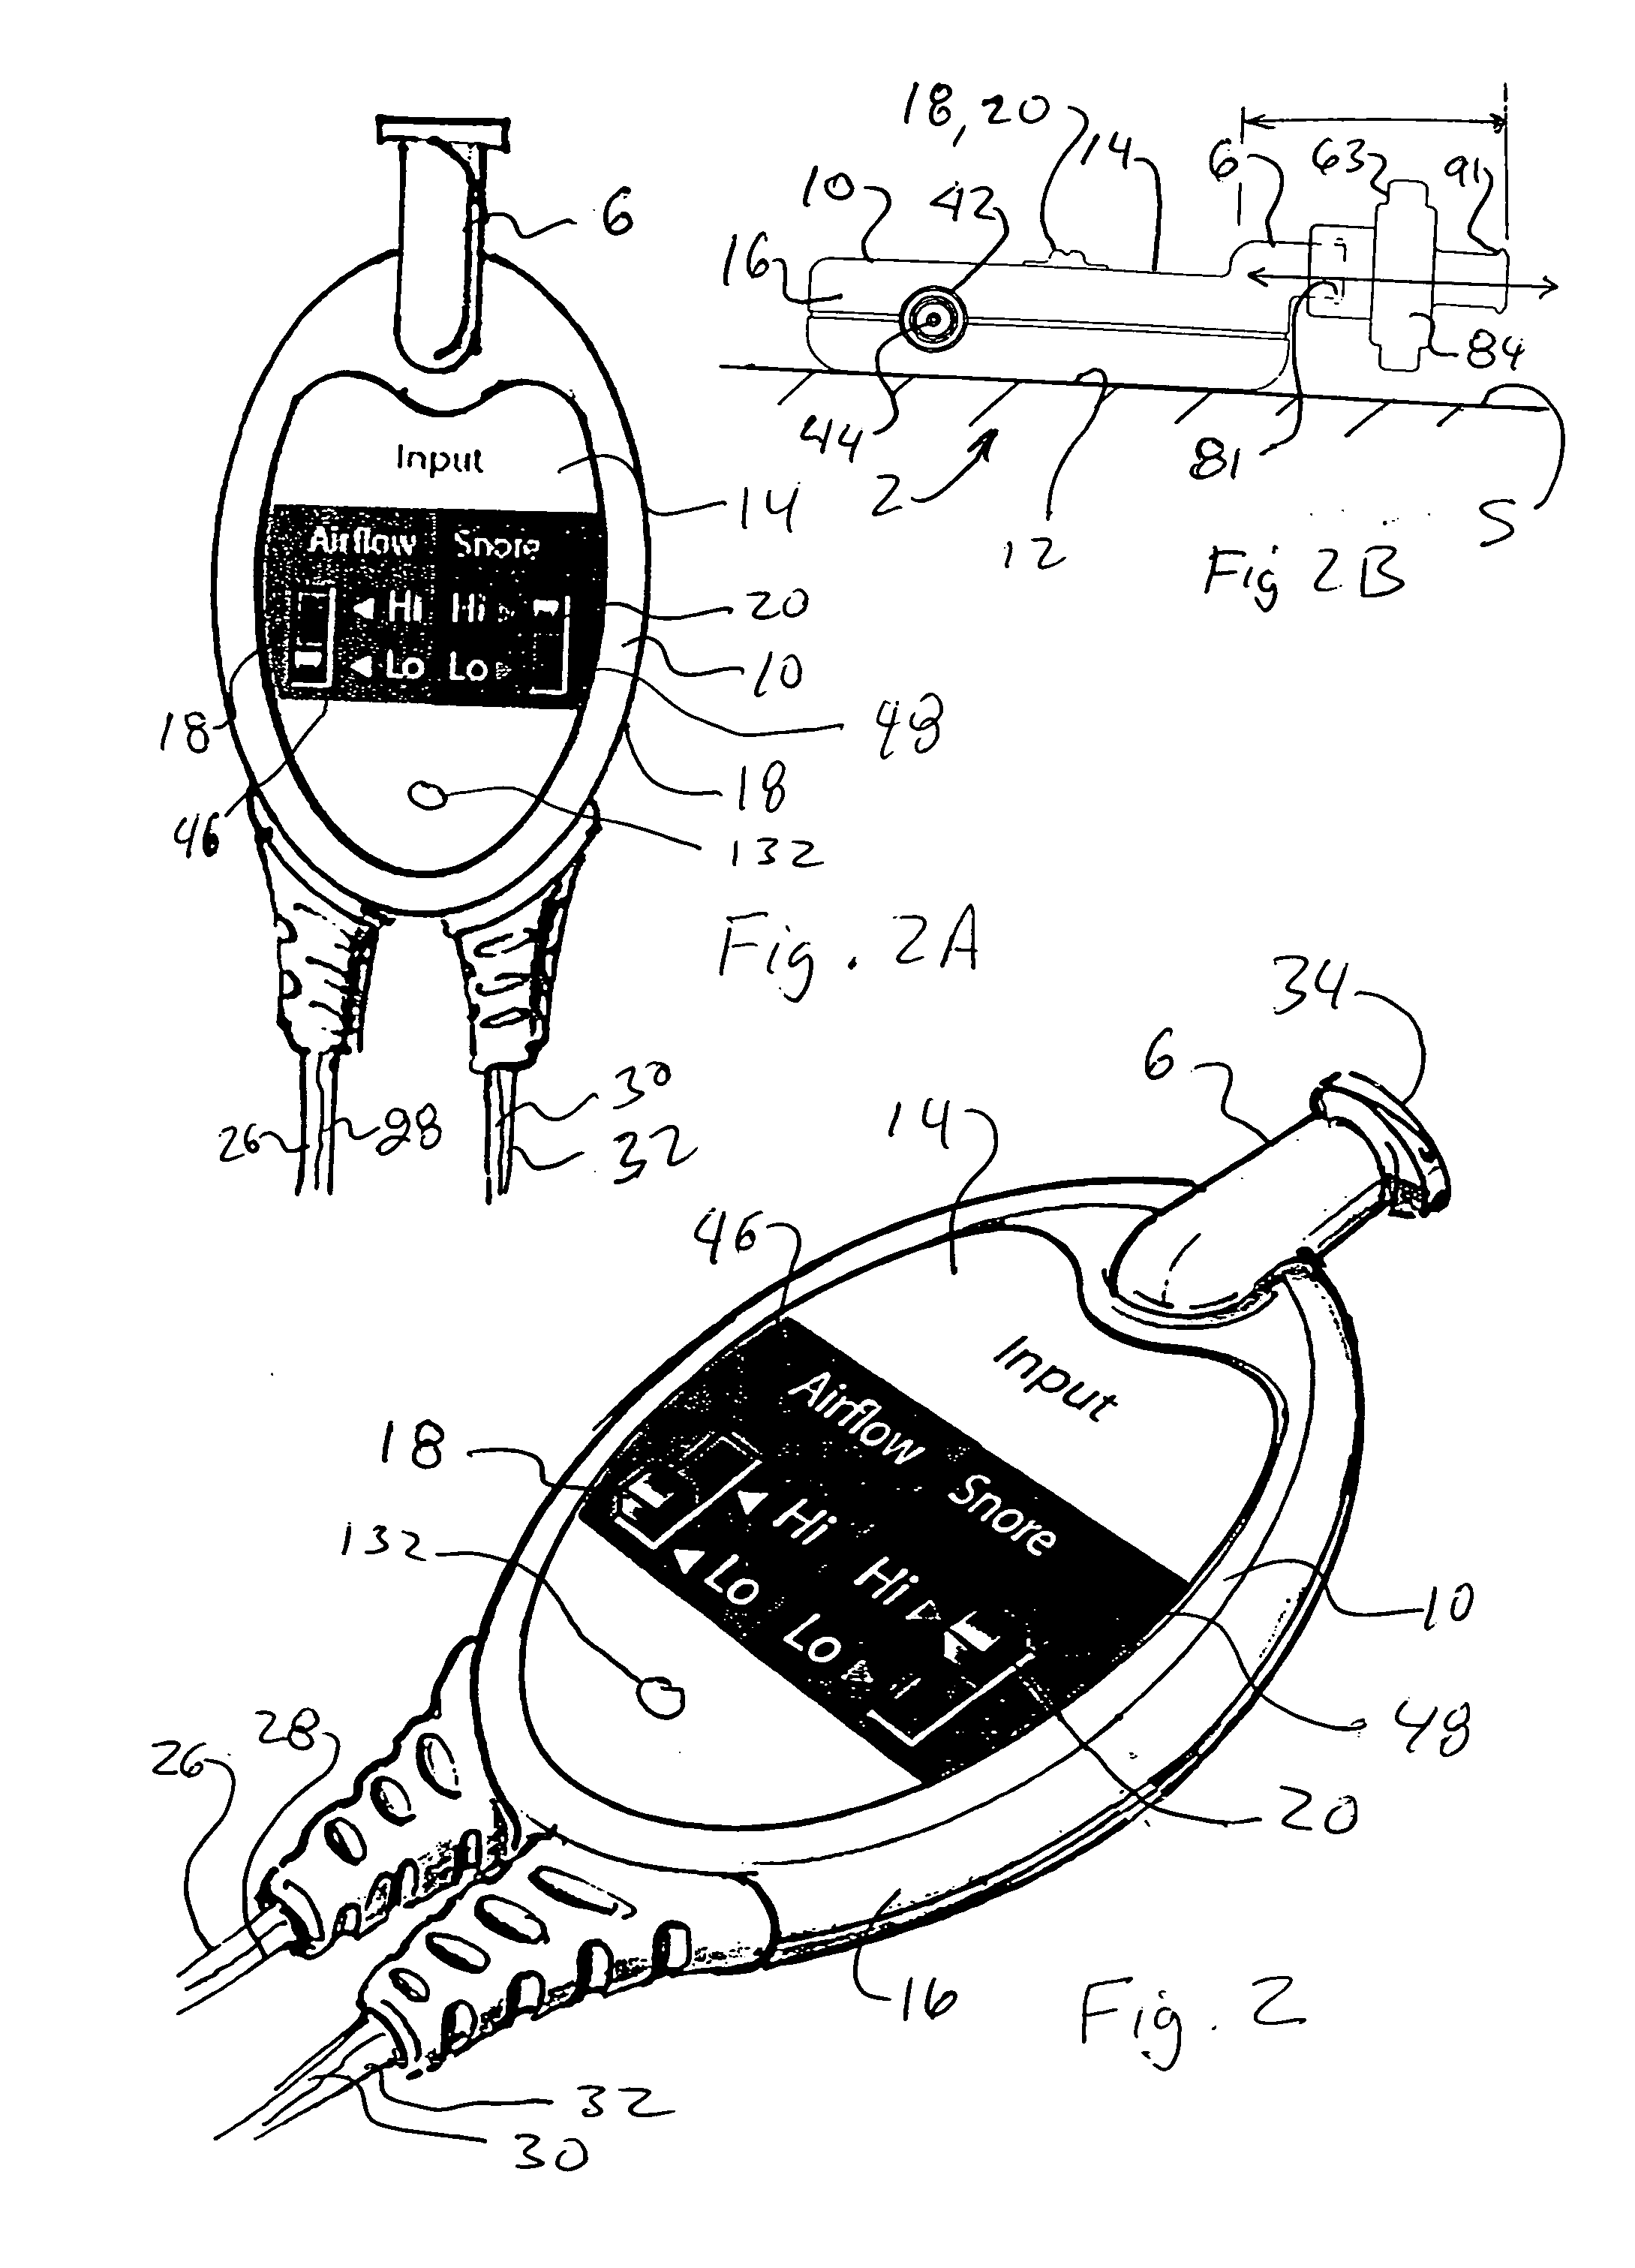 Pressure sensing device with test circuit